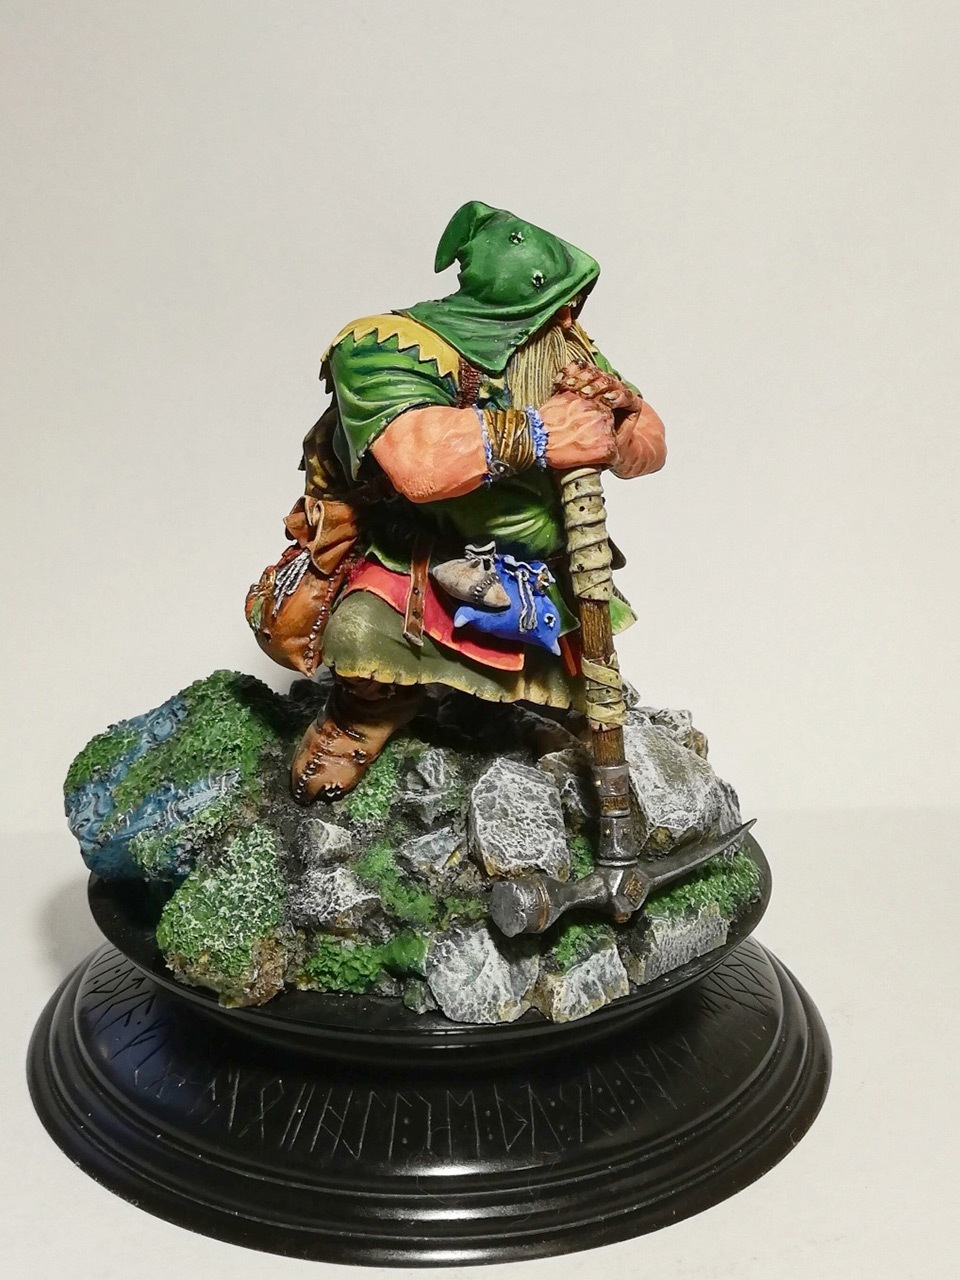 Miscellaneous: Dwarf the Grave Robber, photo #4